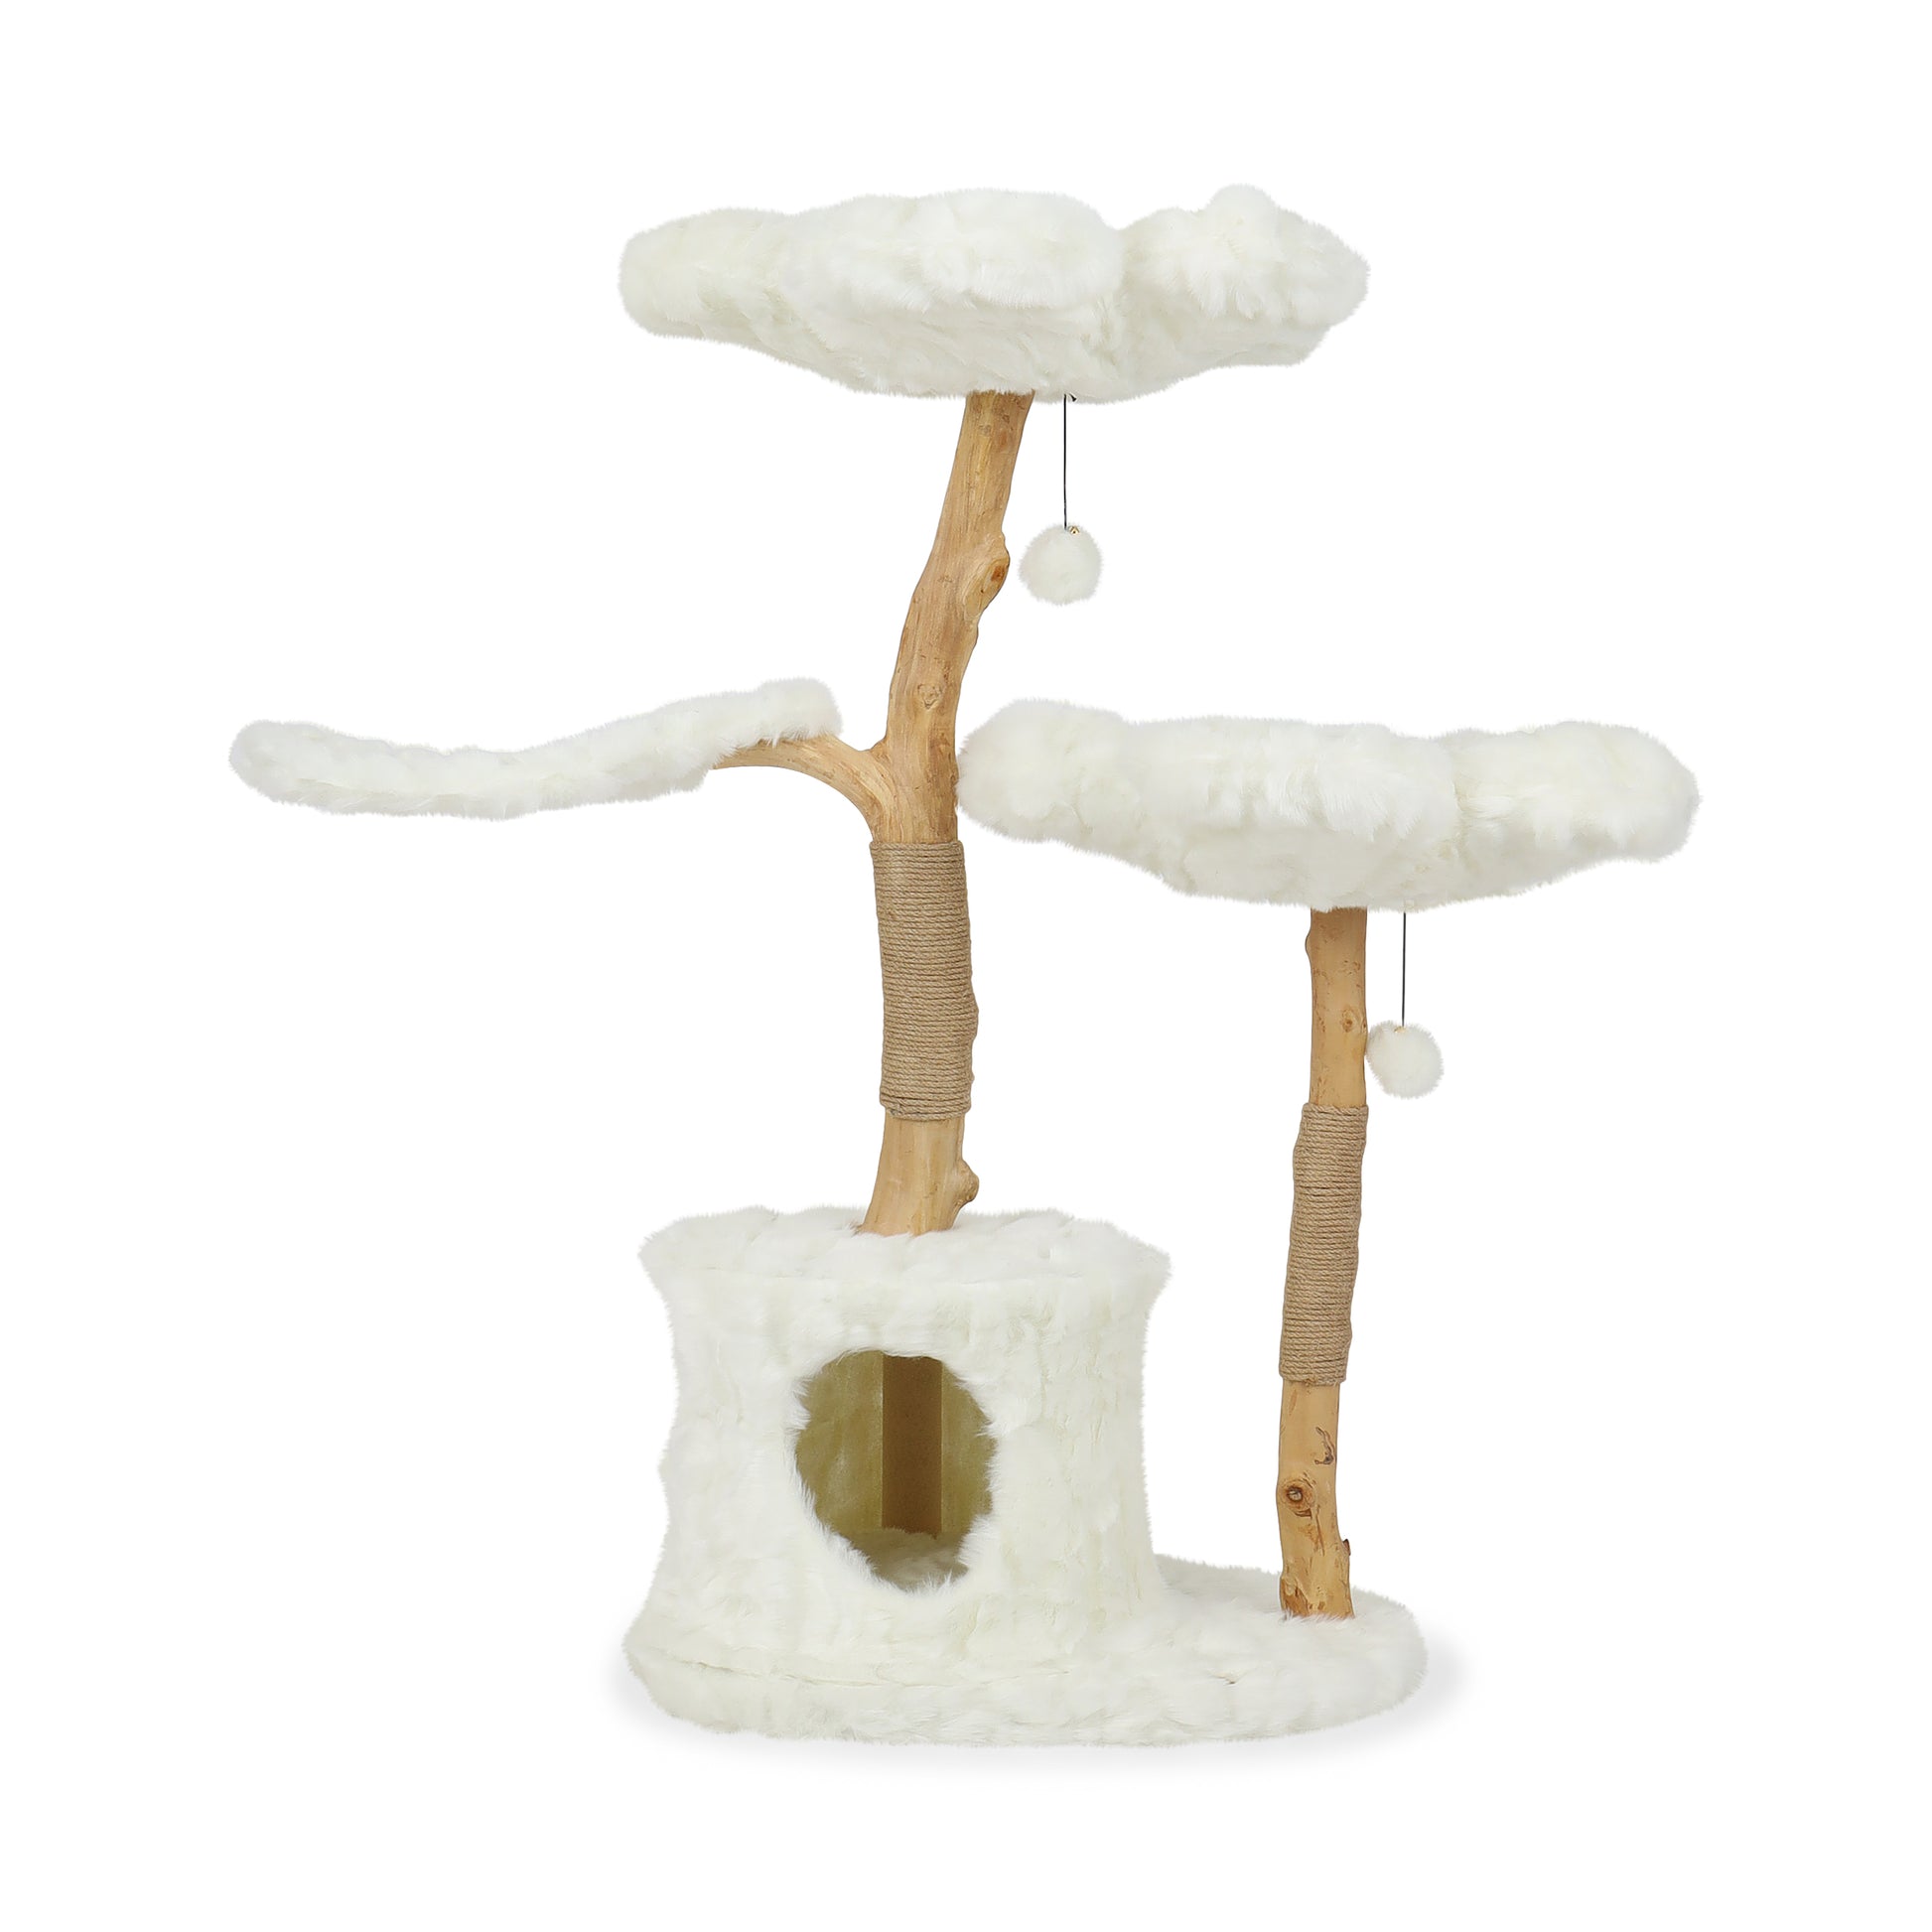 A white teddy teddy blanc floral cat tree with floral patterns